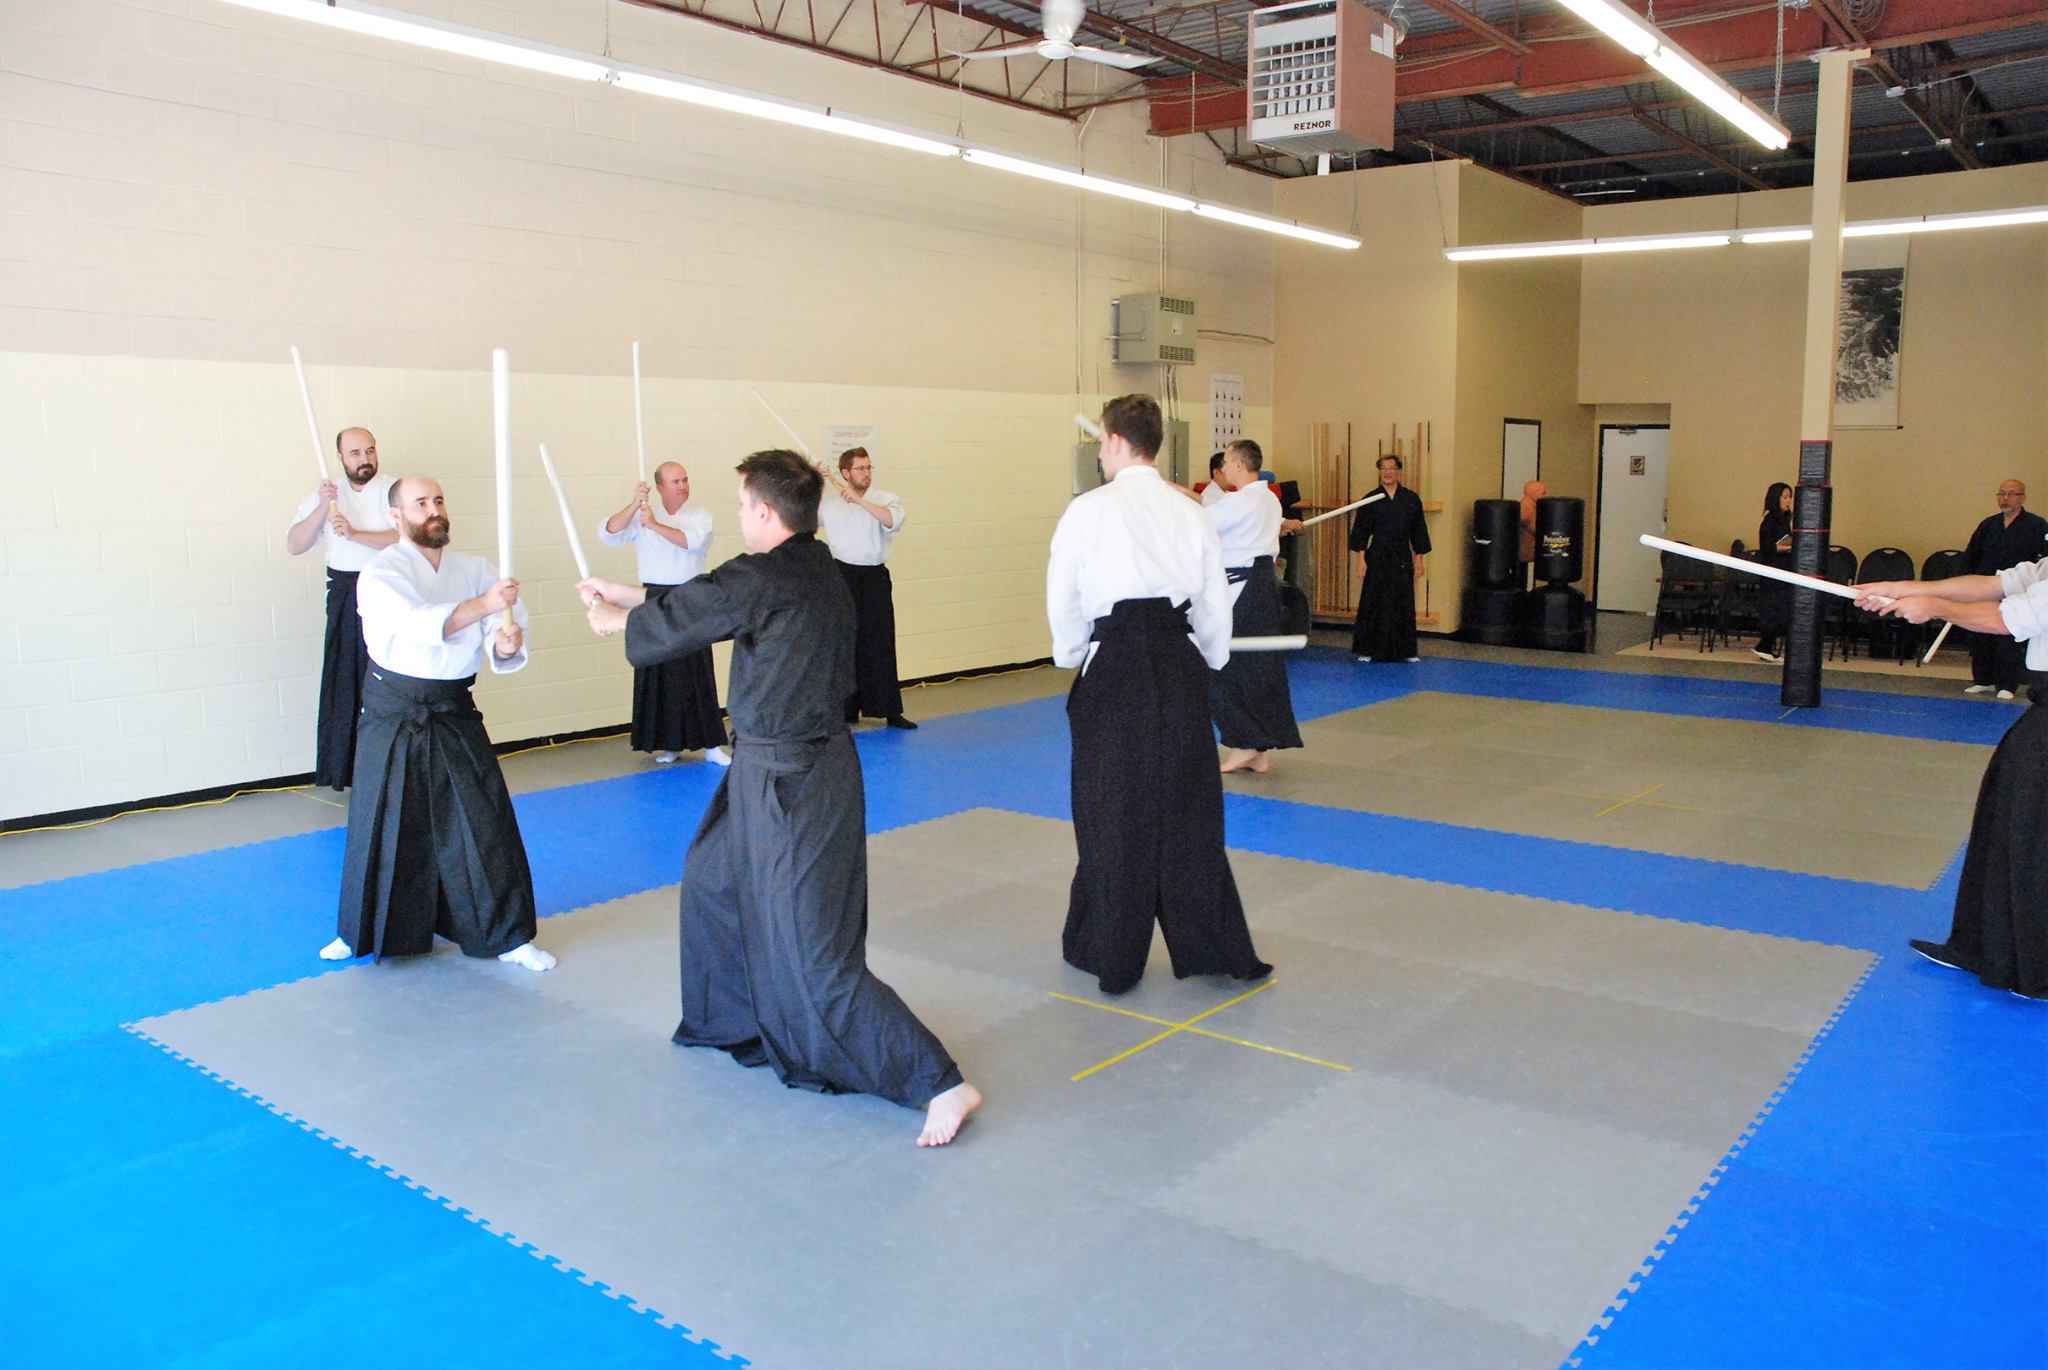 The seminar participants working on some drills